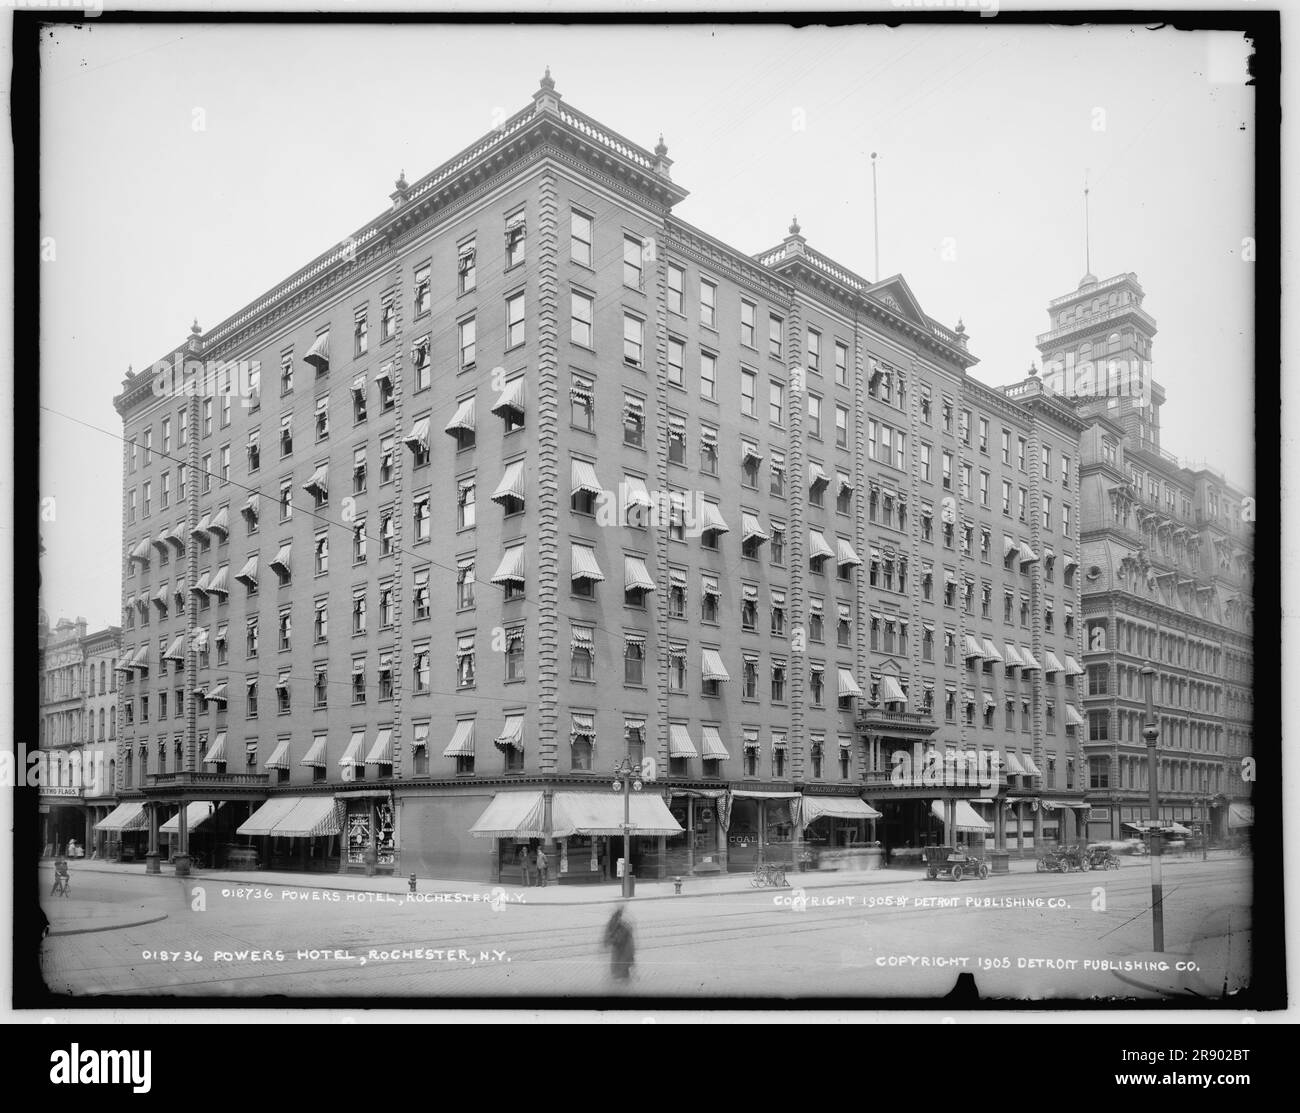 Powers Hotel, Rochester, N.Y., c1905. 'Powers Fireproof Hotel' opened in 1883. It had  four dining rooms, a banquet hall seating 500, and almost a dozen stores opening off the lobby. Famous guests who stayed at the Powers included Mark Twain, Cornelius Vanderbilt, Babe Ruth, Franklin D. Roosevelt, and Lou Gehrig. Note shops sell Remington typewriters, coal and confectionery. Stock Photo